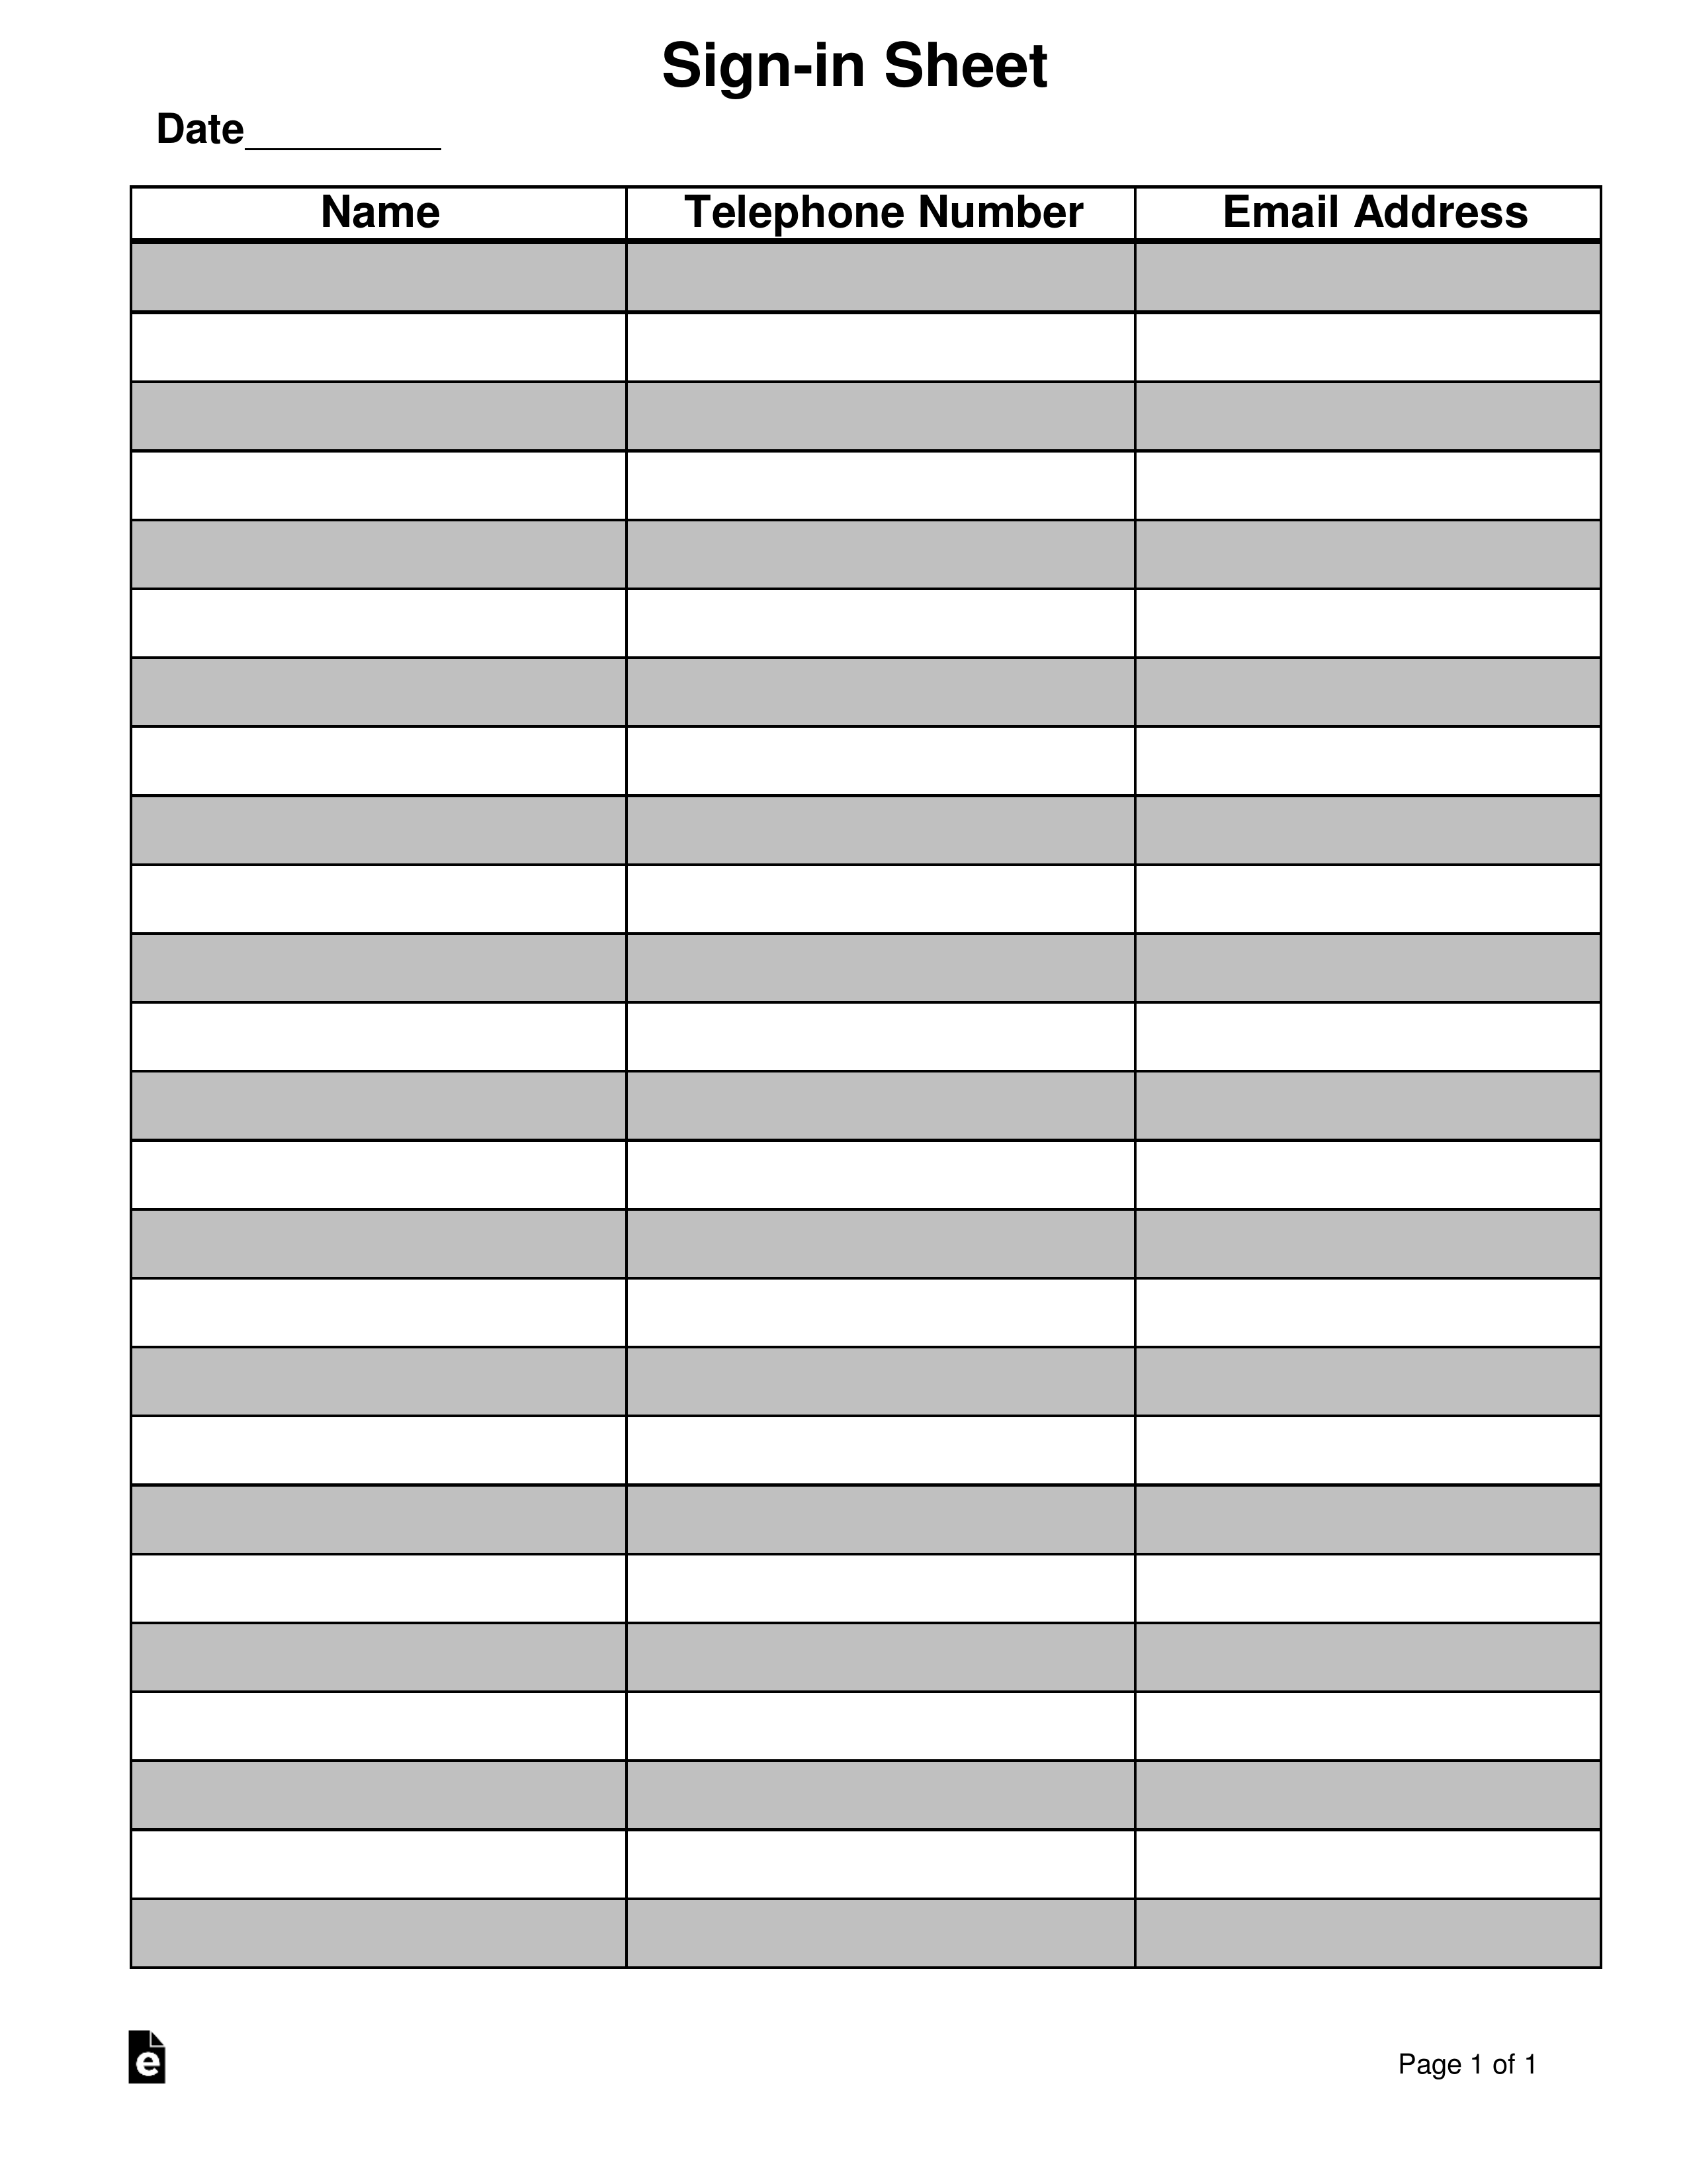 Sign In Sheet Template Free Samples , Examples & Format